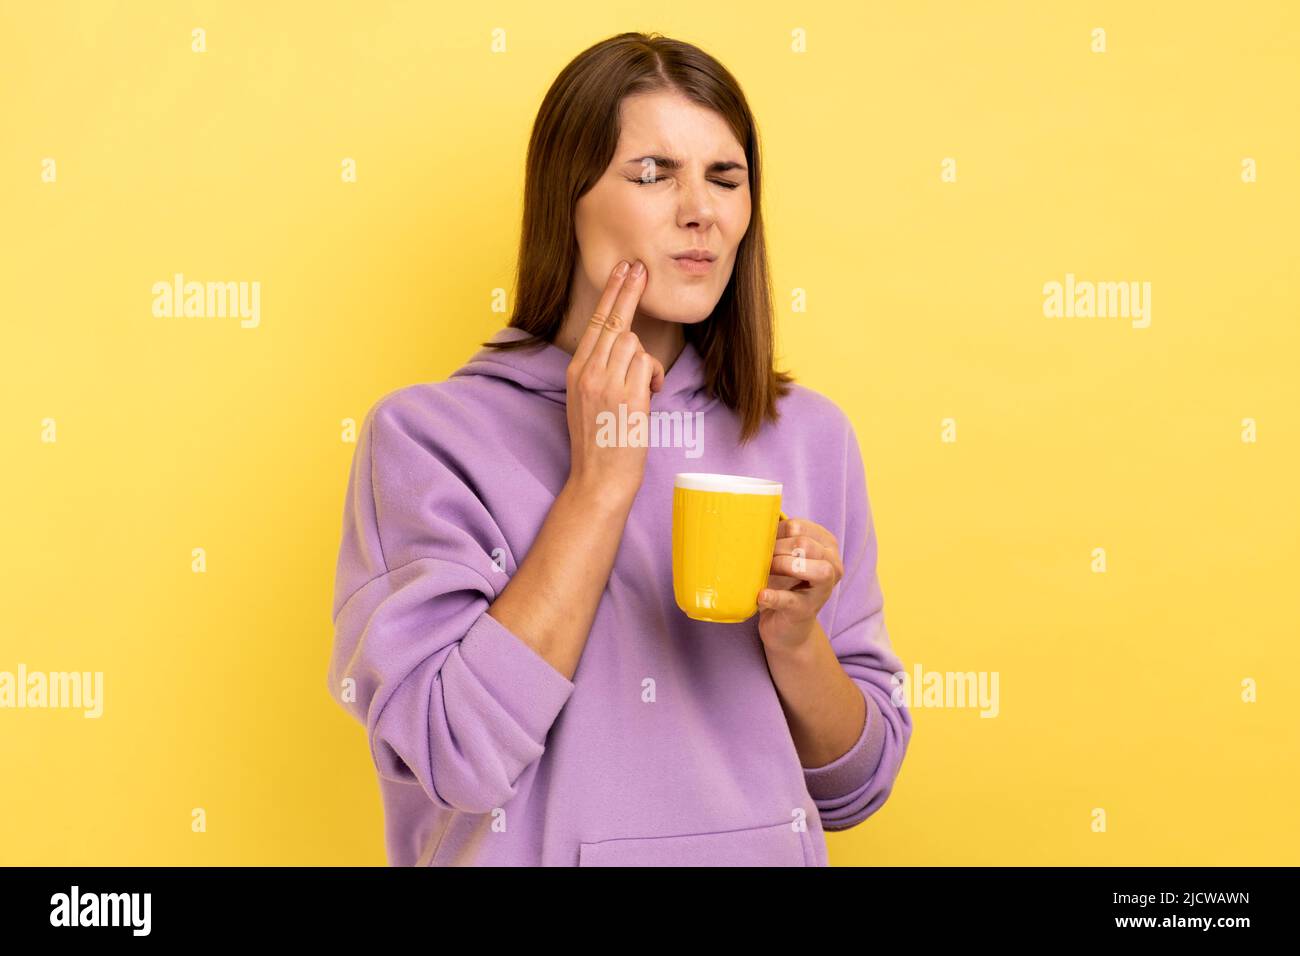 Portrait of sad sick unhealthy woman has teeth pain after drinking hot or cold beverage, dental injury, wearing purple hoodie. Indoor studio shot isolated on yellow background. Stock Photo